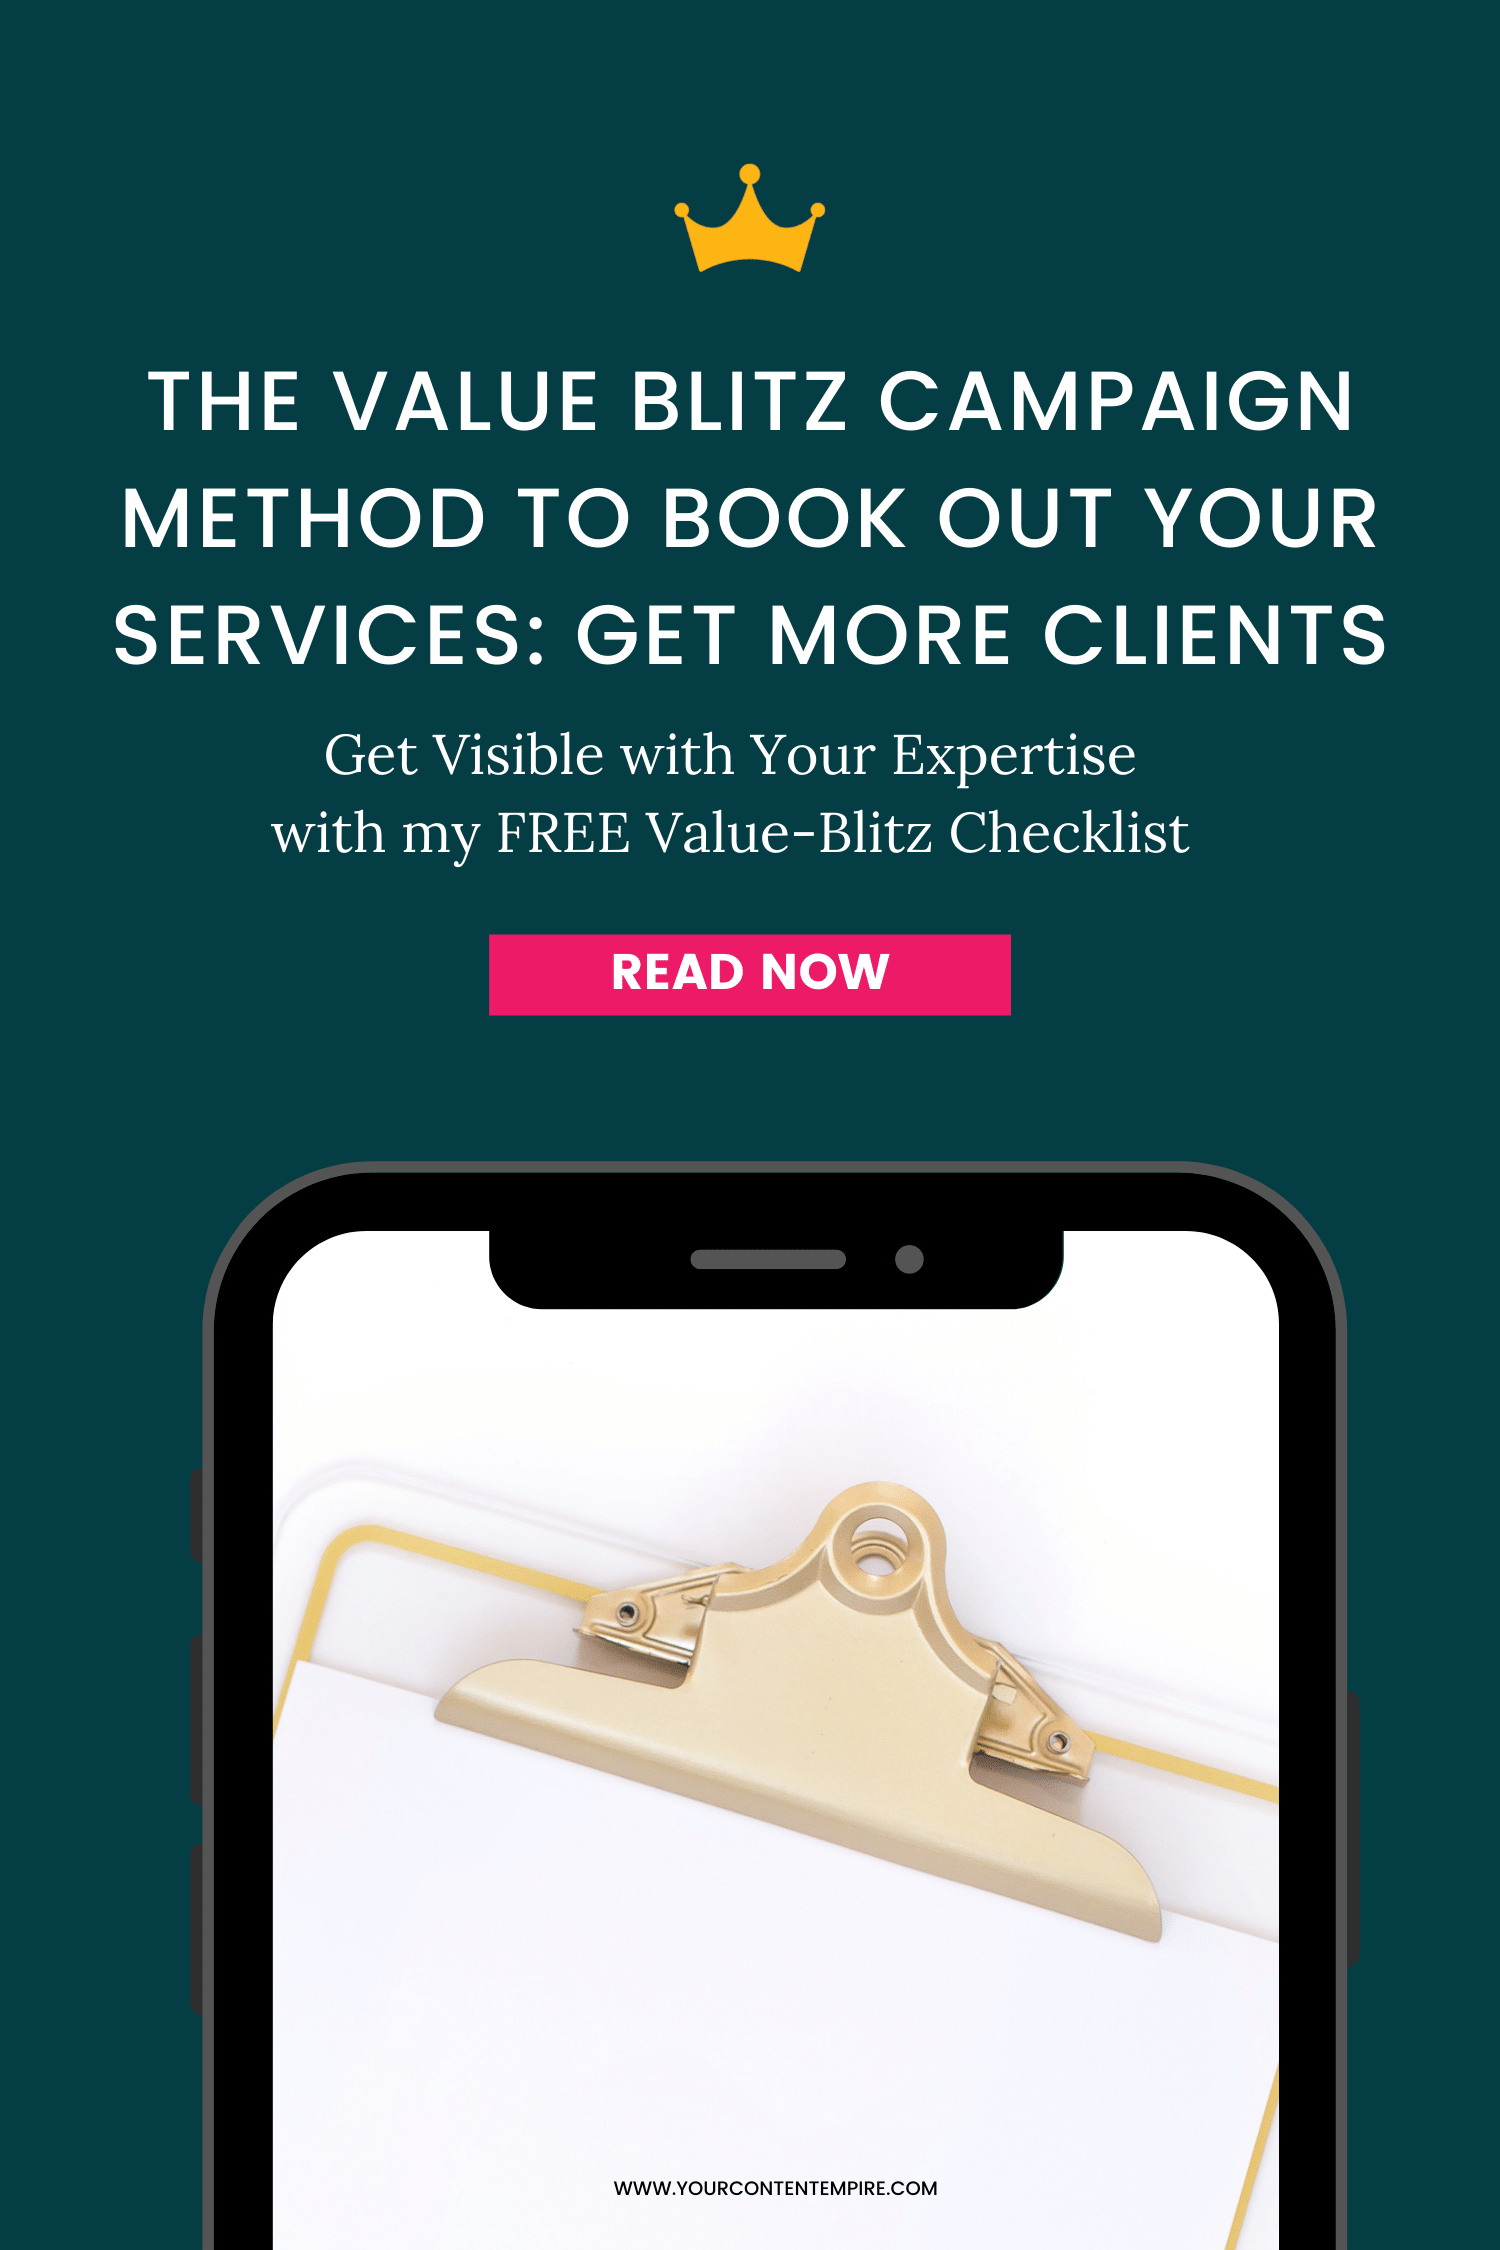 The Value Blitz Campaign Method to Book Out Your Services: Get More Clients